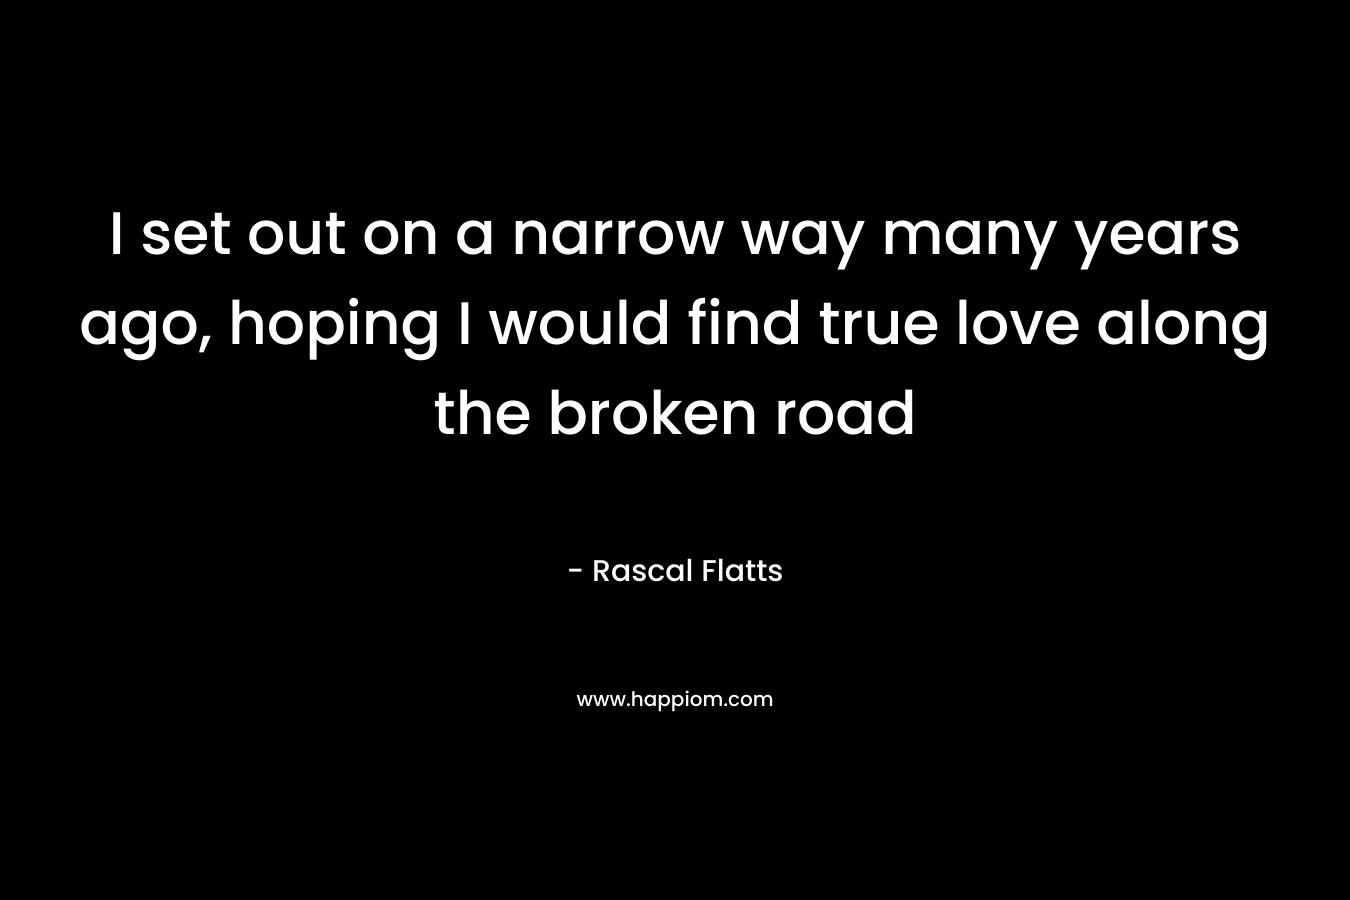 I set out on a narrow way many years ago, hoping I would find true love along the broken road – Rascal Flatts